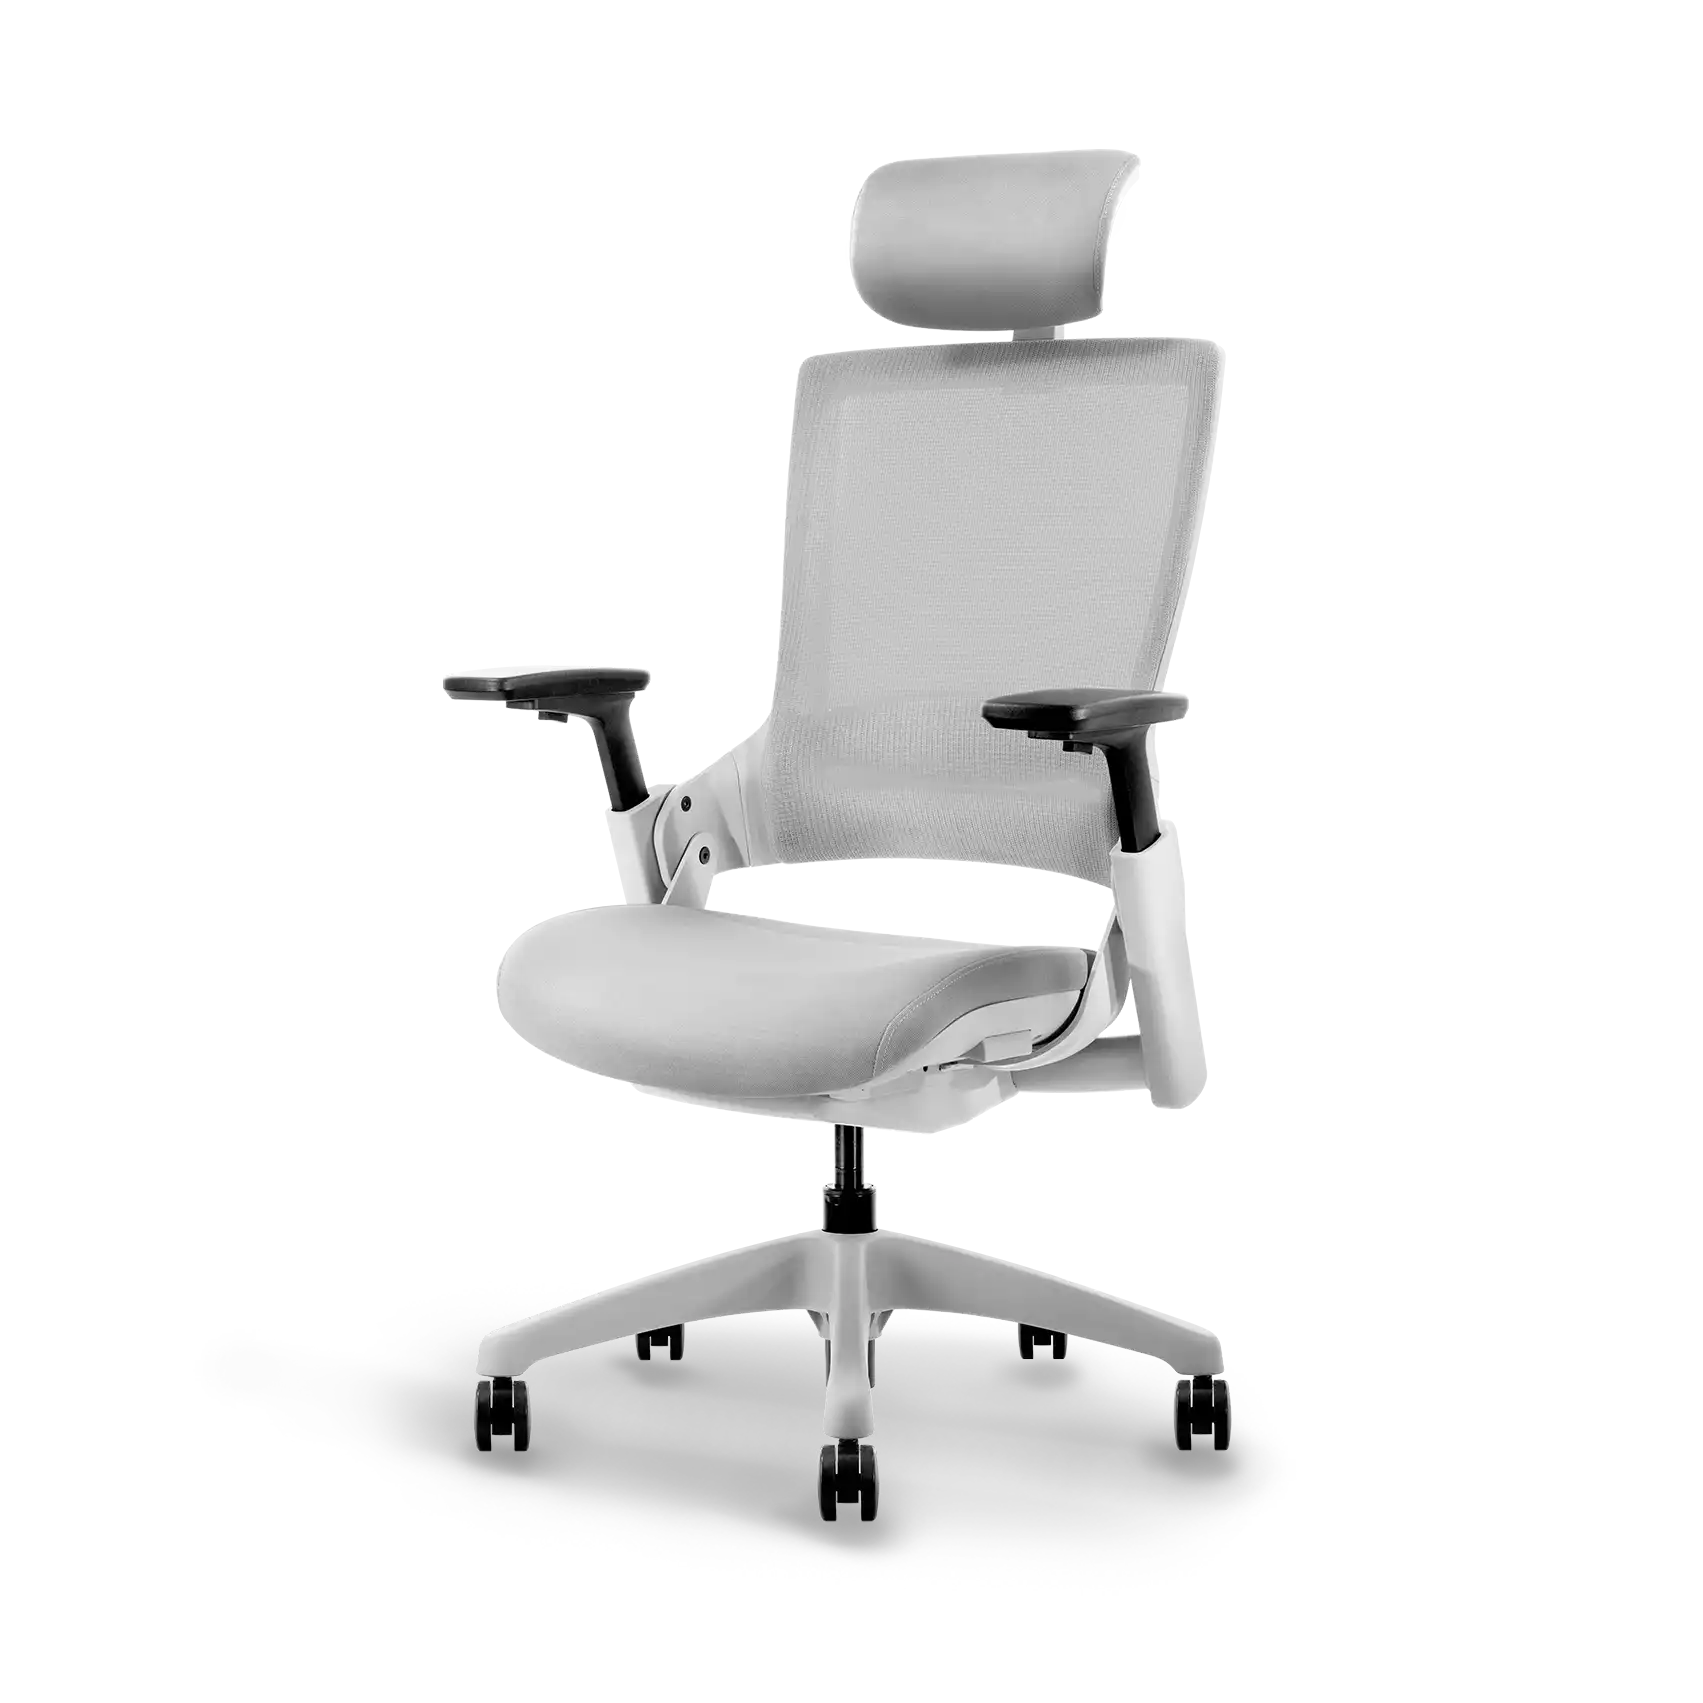 Flujo Angulo ergonomic office chair in grey with adjustable armrests